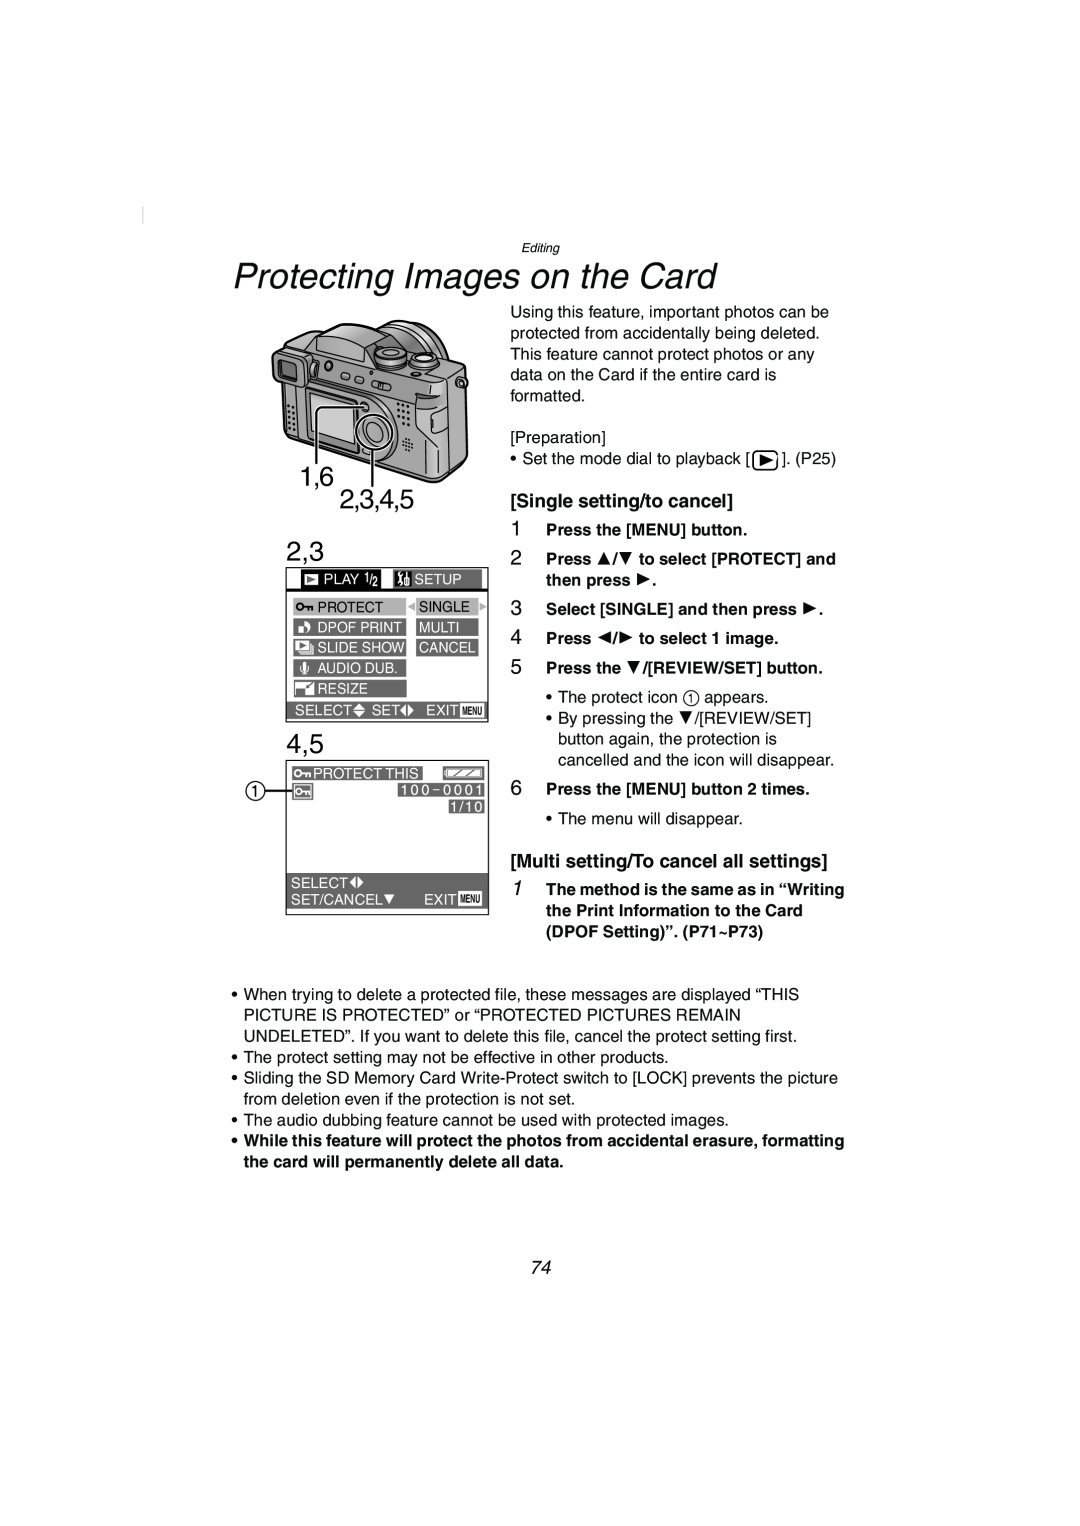 Panasonic DMC-FZ2PP Protecting Images on the Card, 1,6 2,3,4,5, Select SINGLE and then press 4 Press 2/1 to select 1 image 